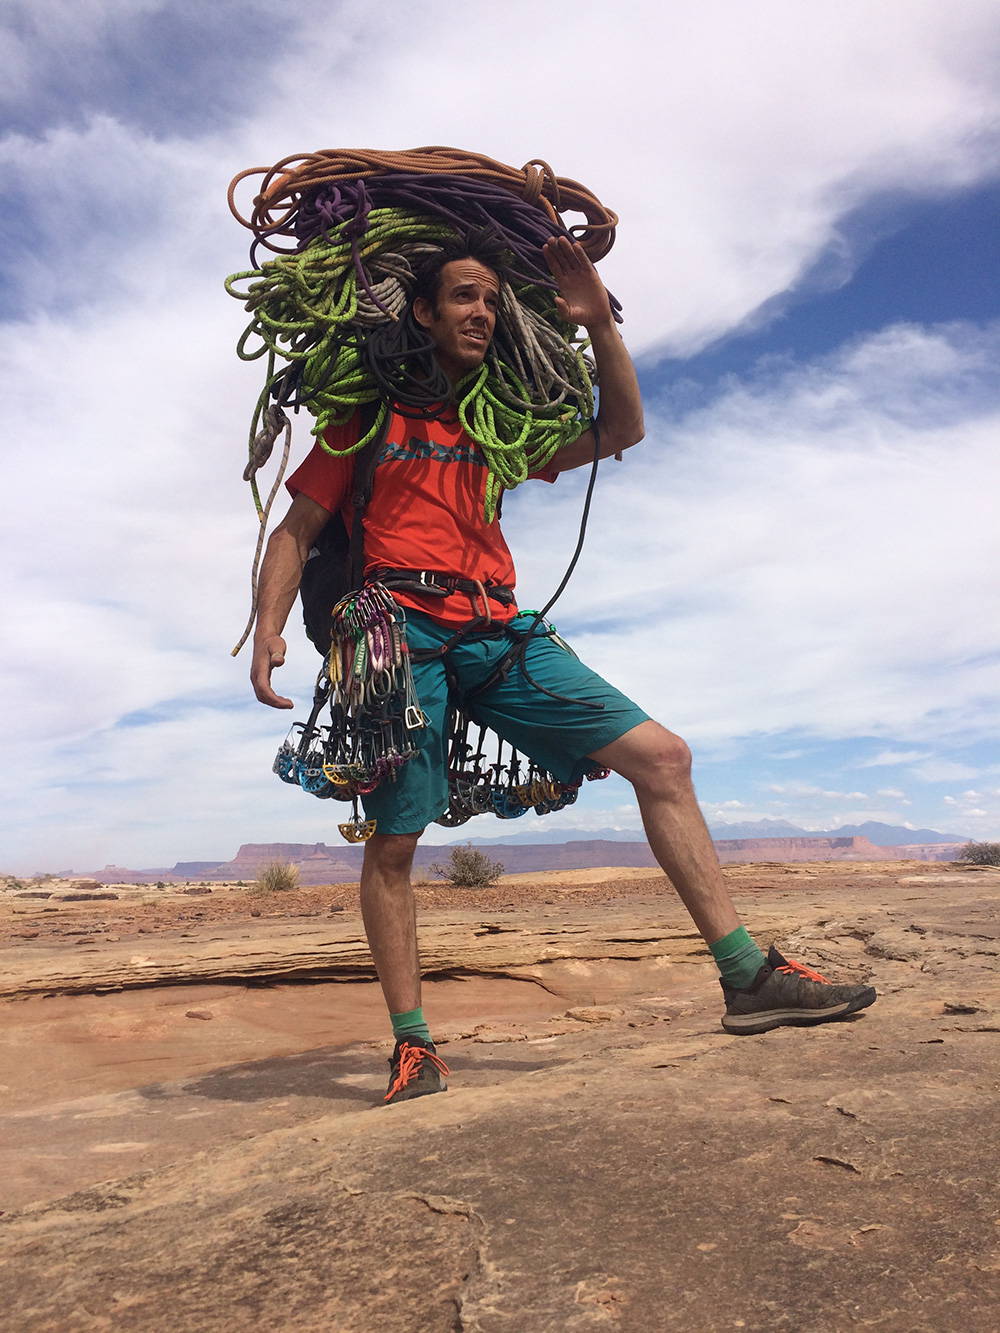 image of Climber loaded with gear